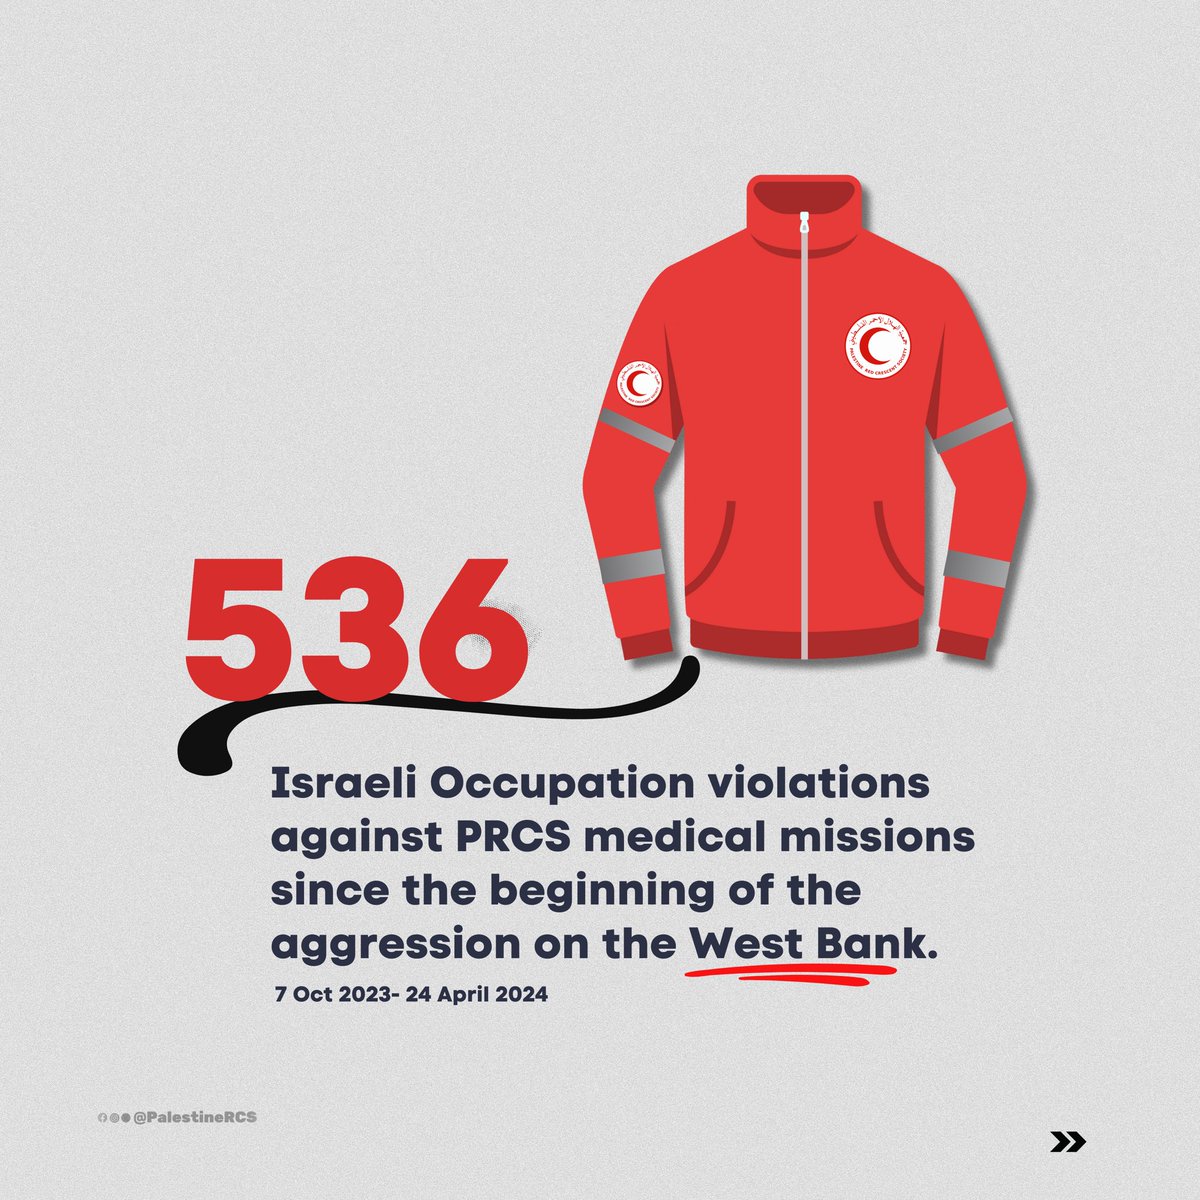 536 violations against PRCS medical missions in the West Bank since October 7. #NotATarget #IHL